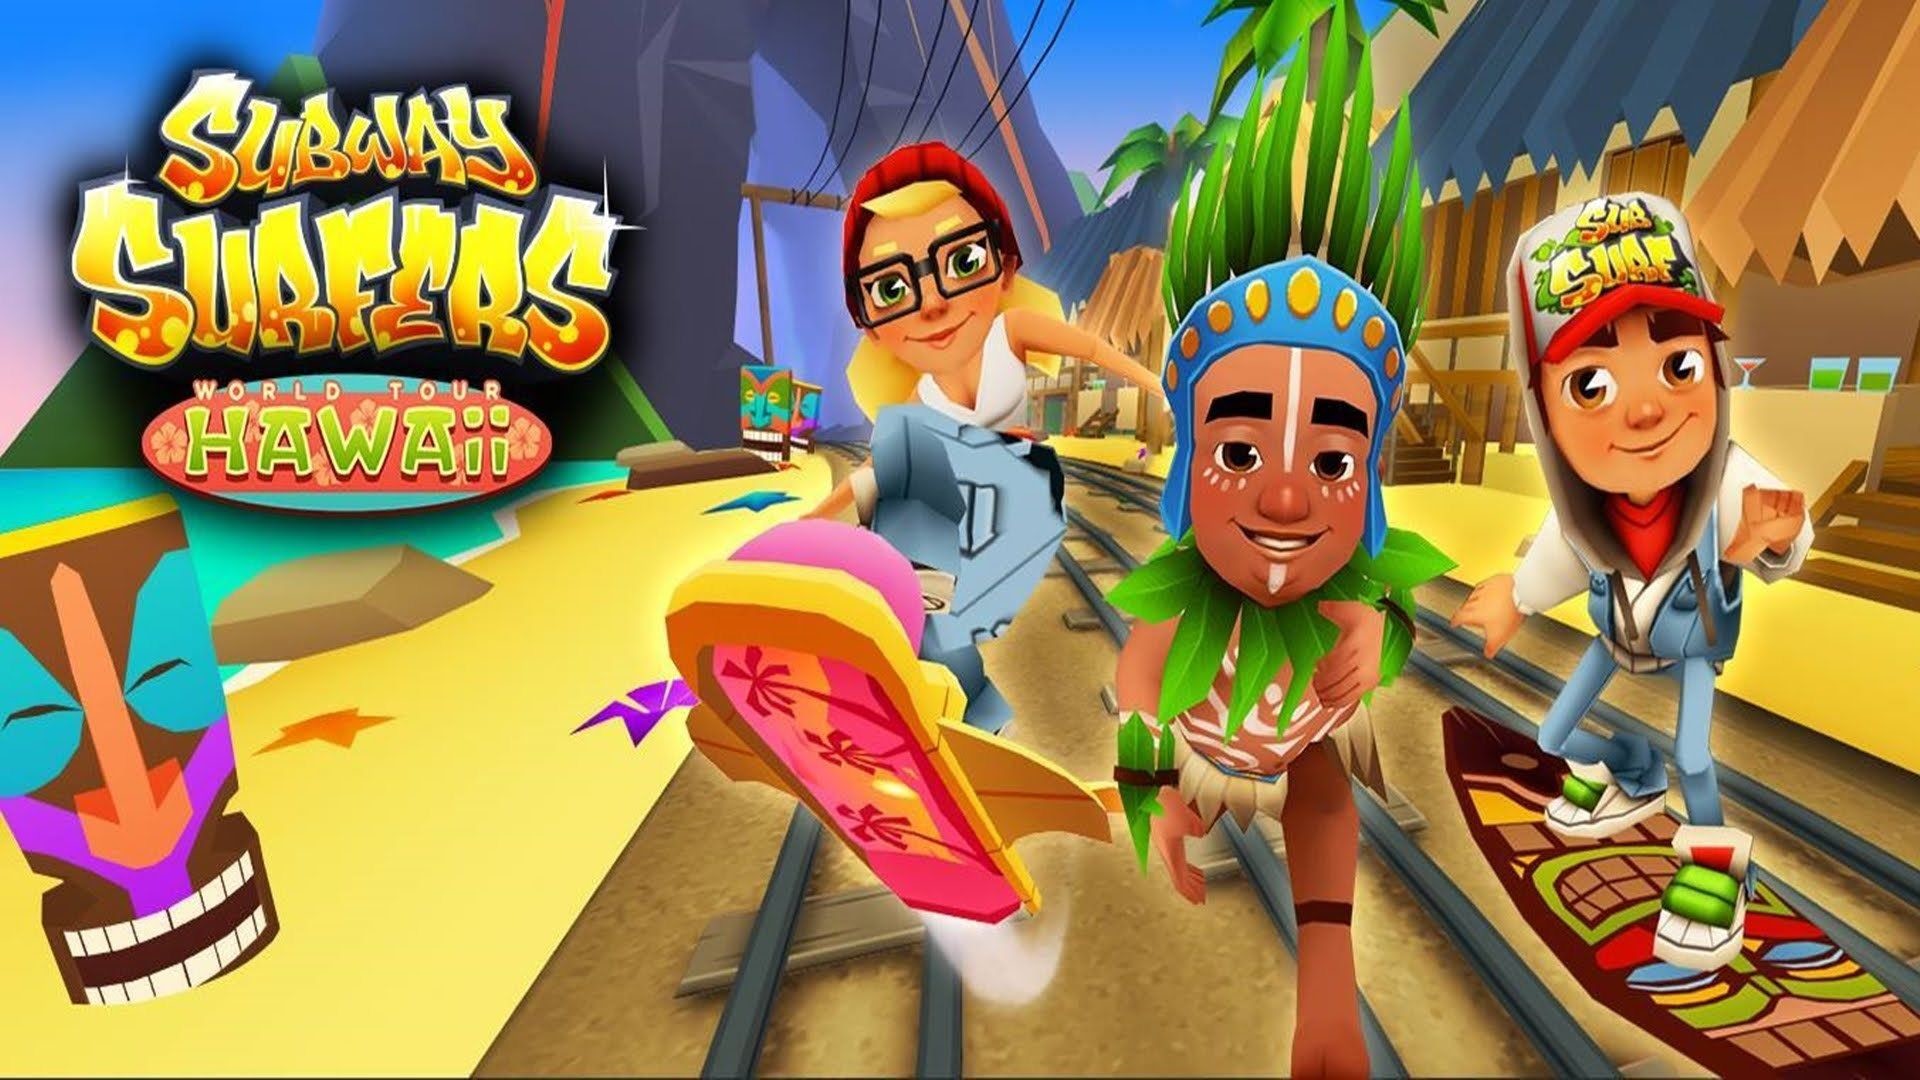 Subway surfers game download for pc windows 10